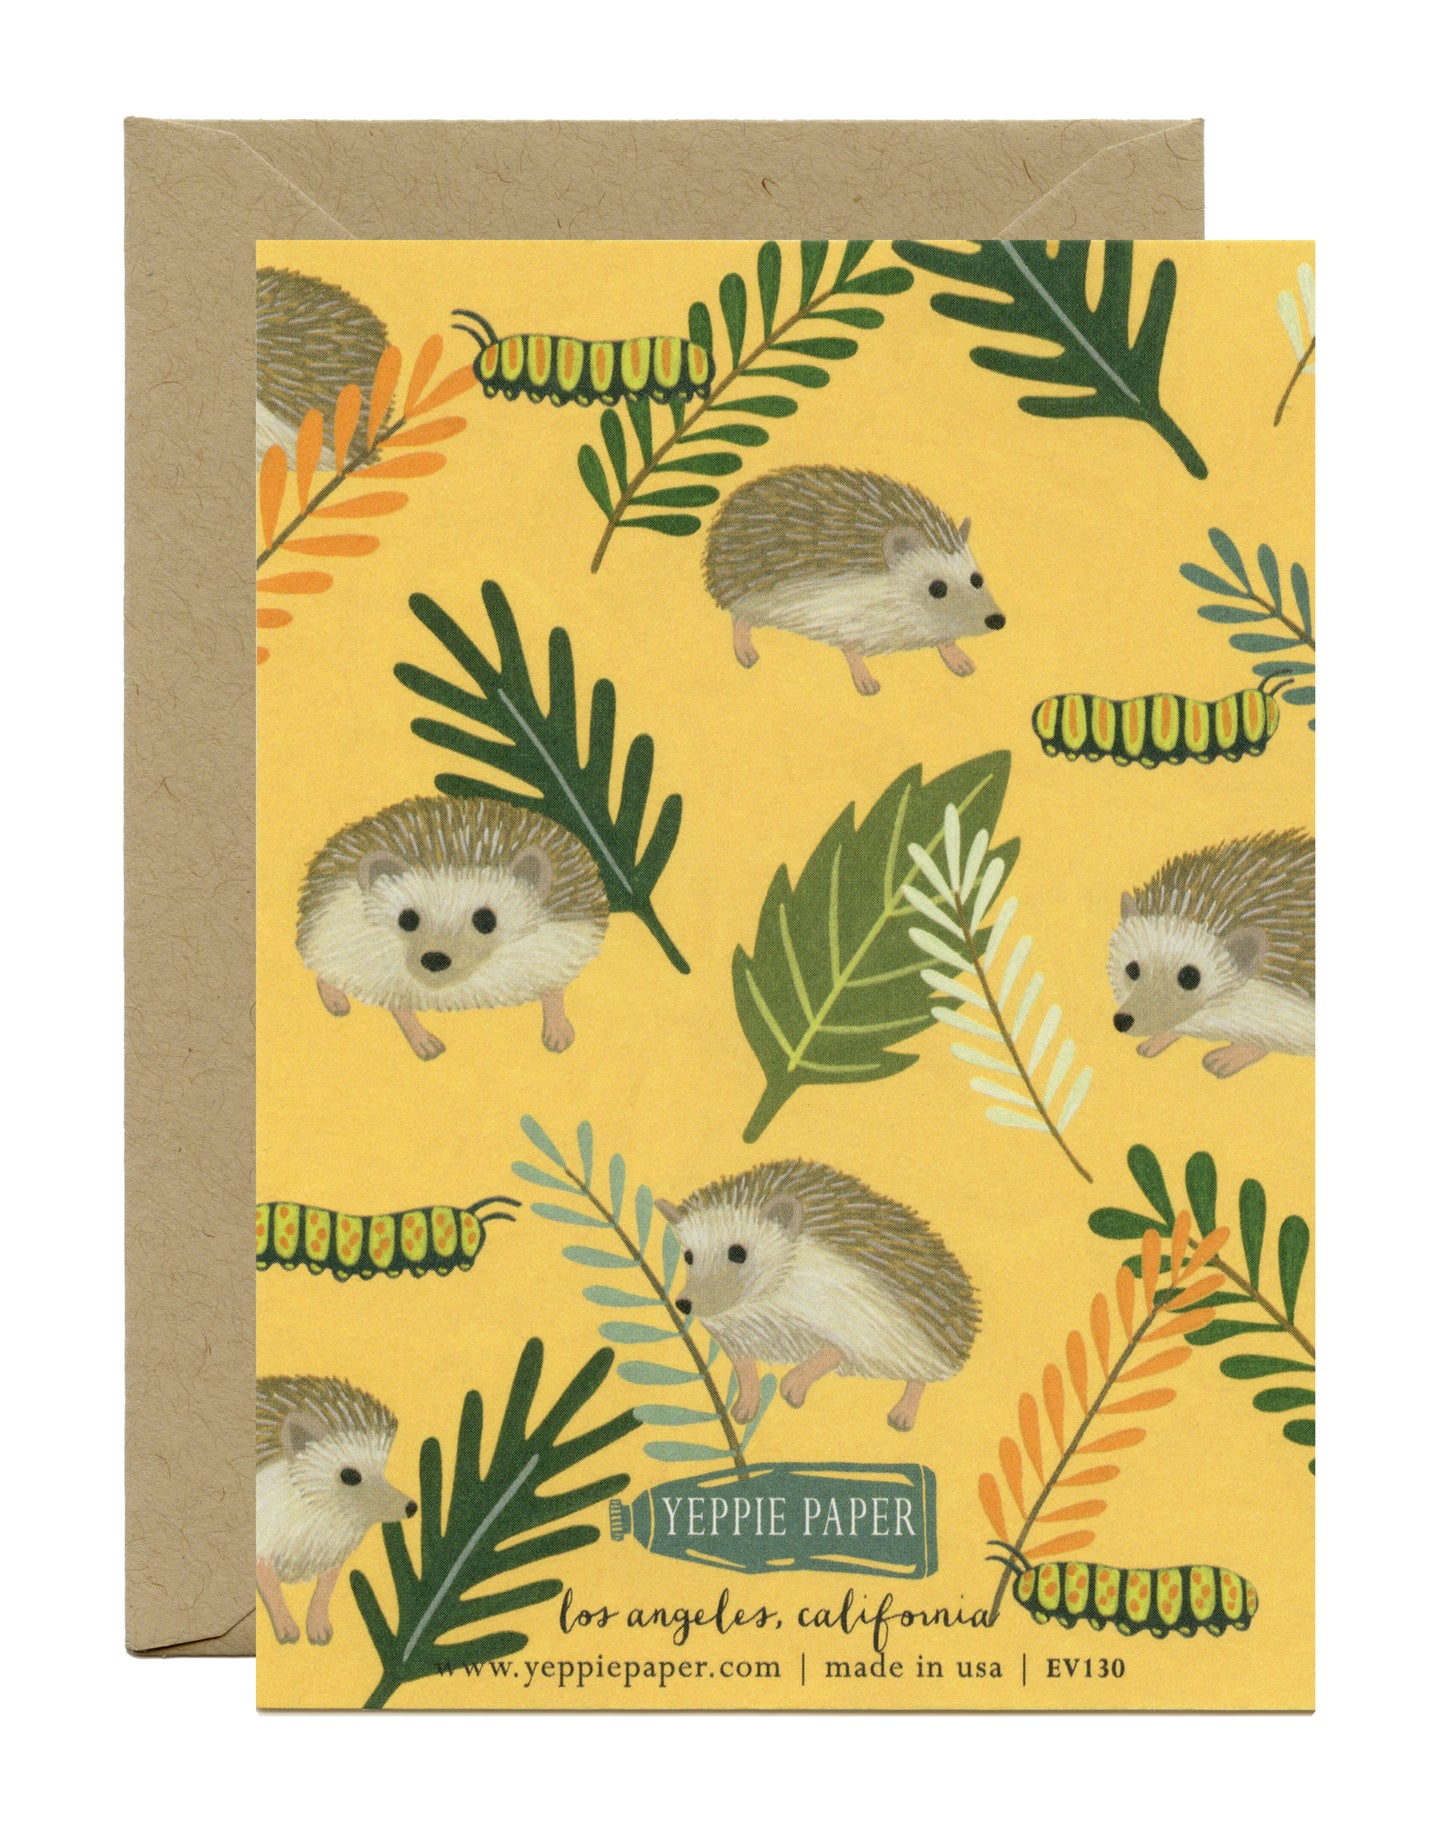 EVERYDAY HEDGEHOGS AND CATERPILLARS - BLANK GREETING CARD